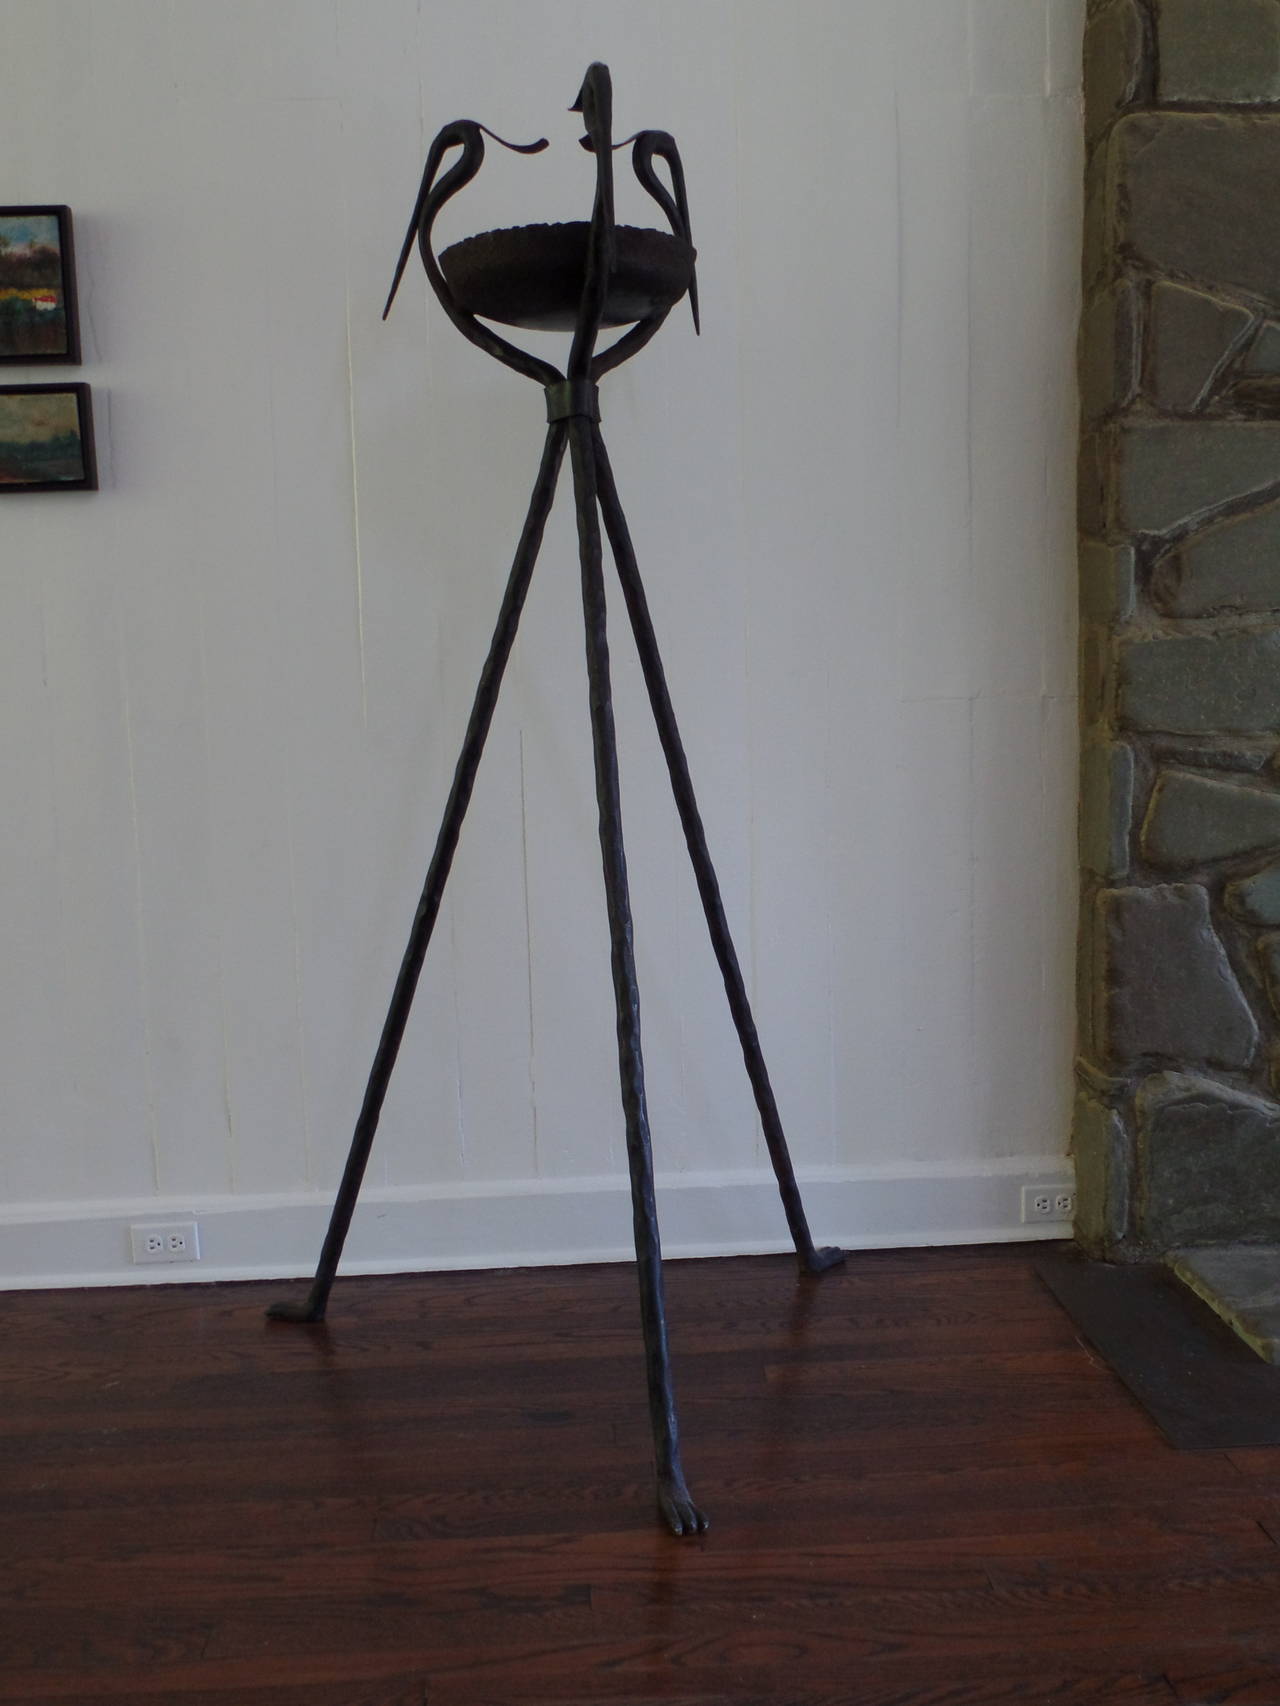 Unique, extraordinary handmade pair of French 1940s floor lamps, standing lamps or sculptures in hand-forged and hand-hammered iron.

These stunning master works of blacksmithing are composed of hammered iron tripod bases ending in three profiles of